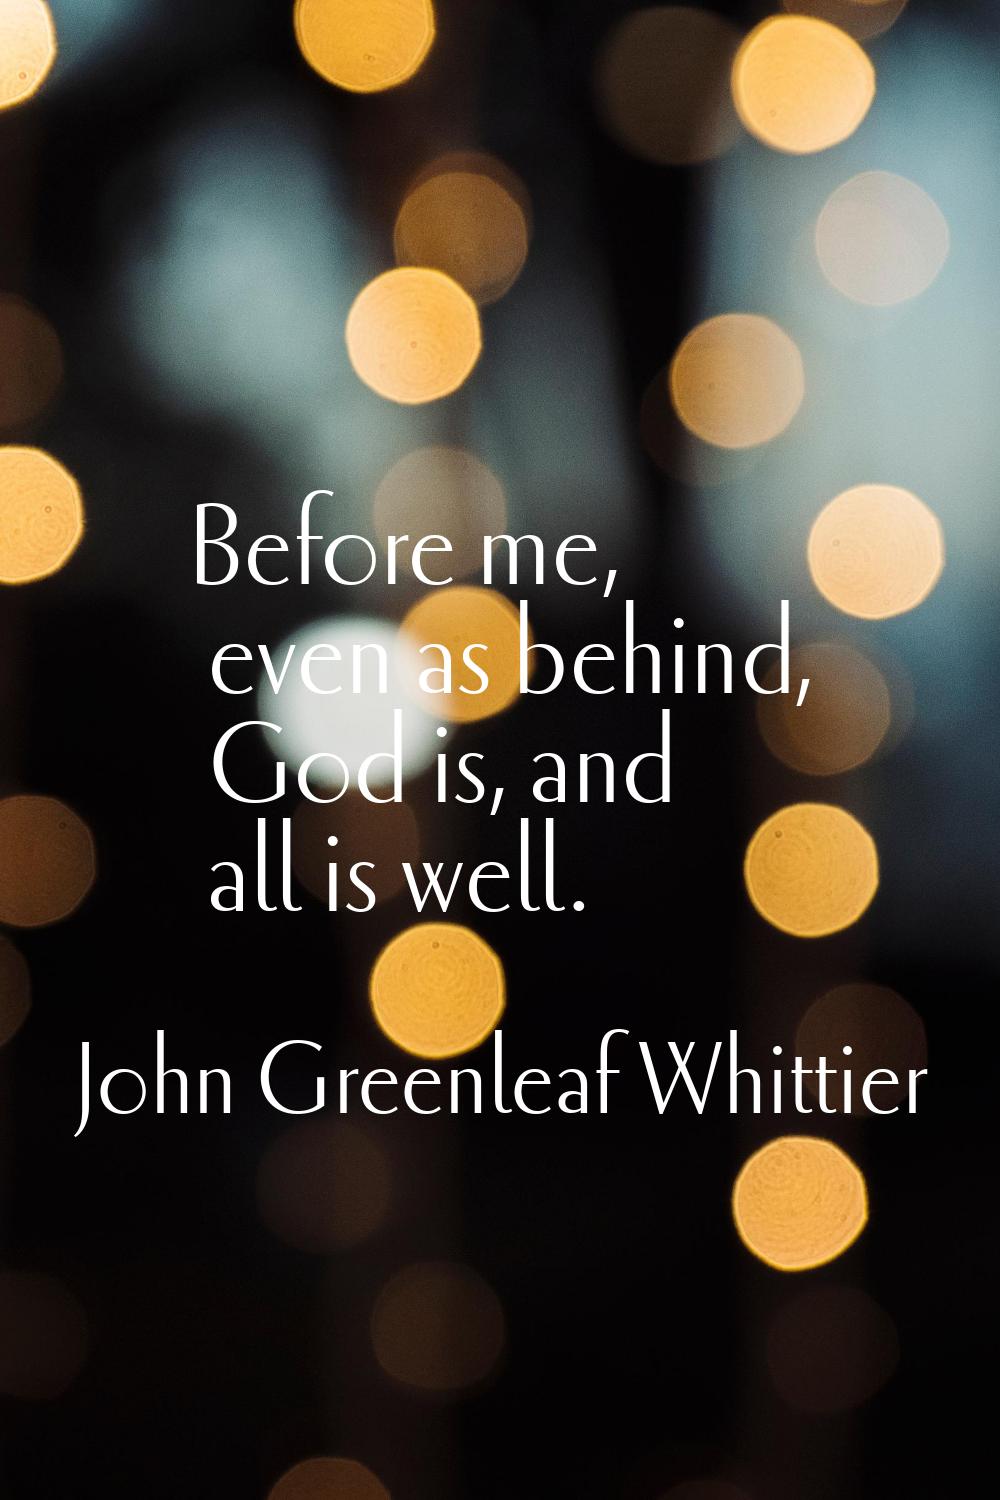 Before me, even as behind, God is, and all is well.